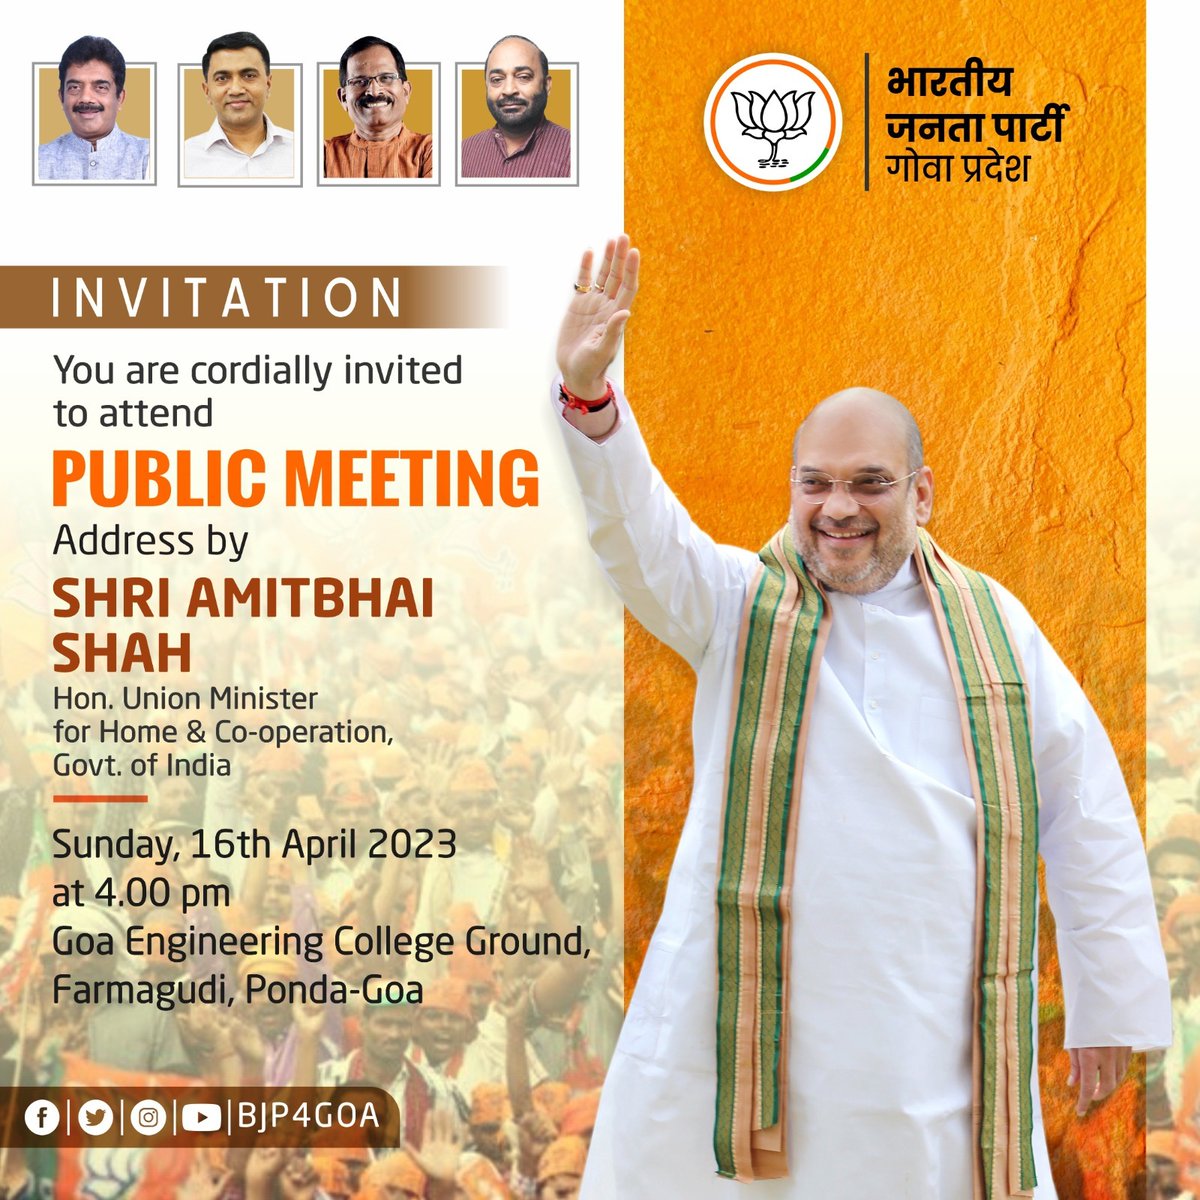 Union Home Minister #ShriAmitShah will address a public meeting at Farmagudi, Ponda on 16 April at 4:00 pm. Do attend in large numbers. *
BJP GOA Pradesh
#pramodsawant